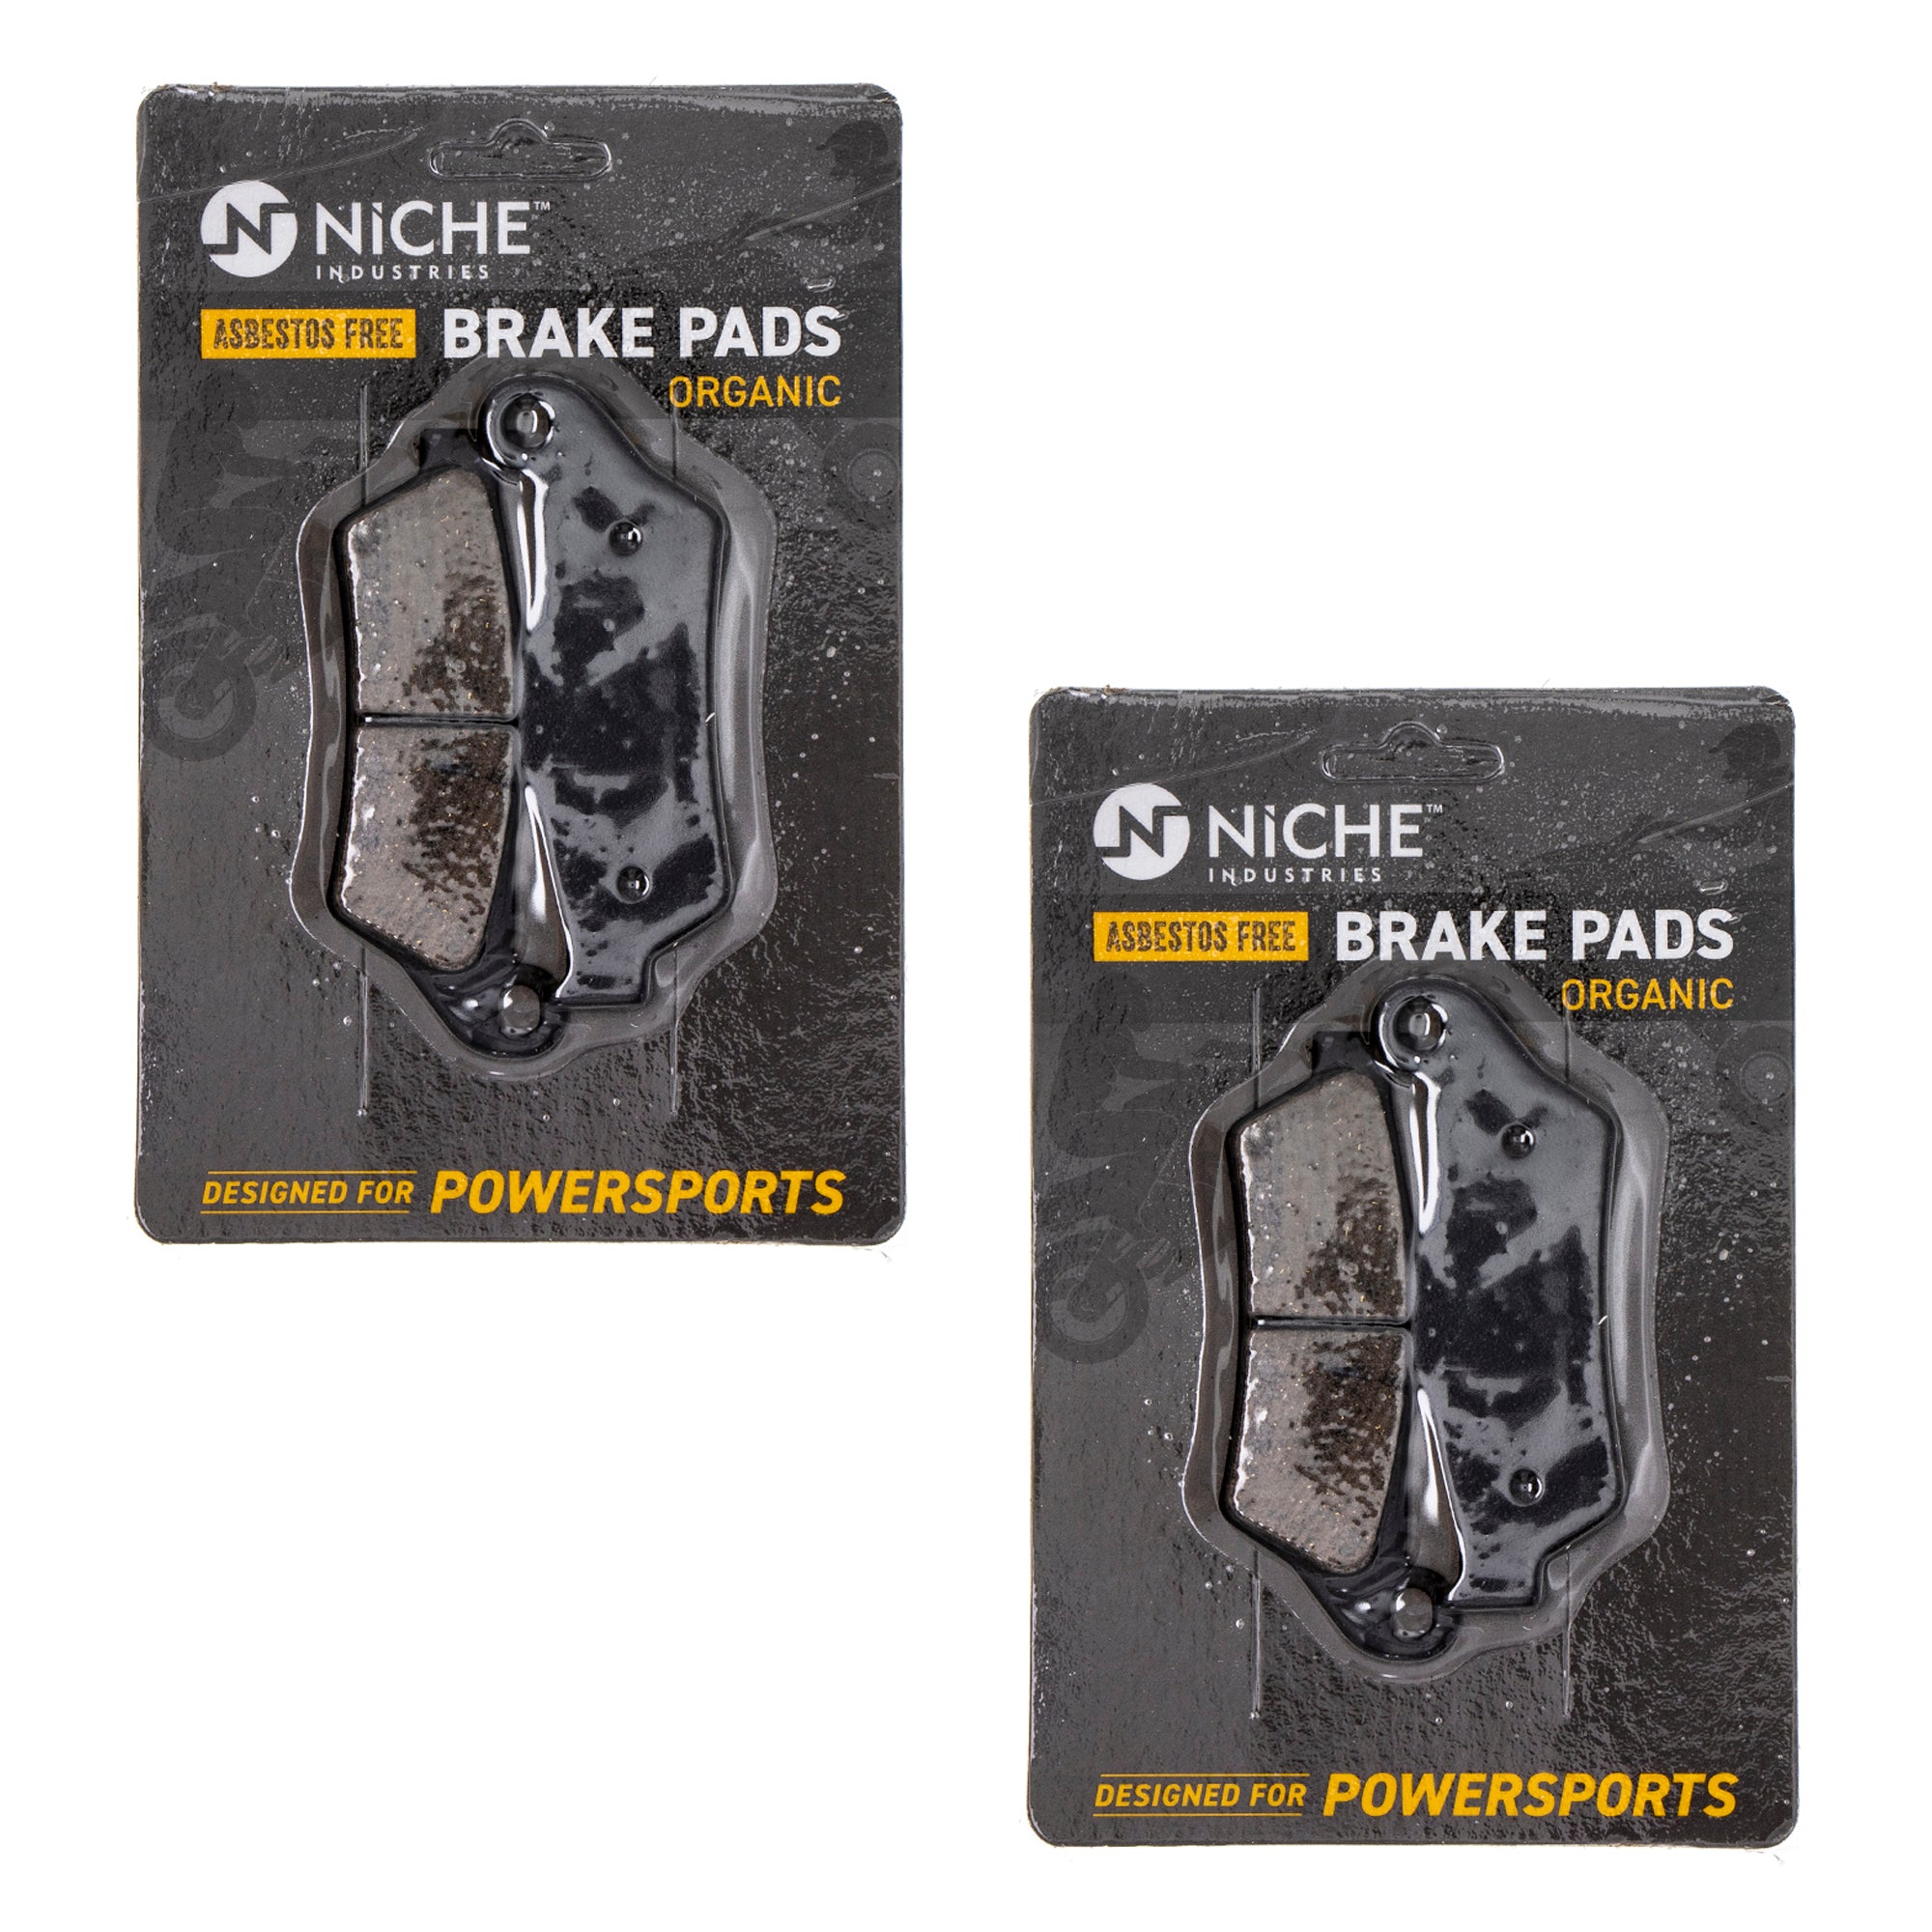 NICHE MK1002820 Brake Pad Kit Front/Rear for zOTHER Multistrada